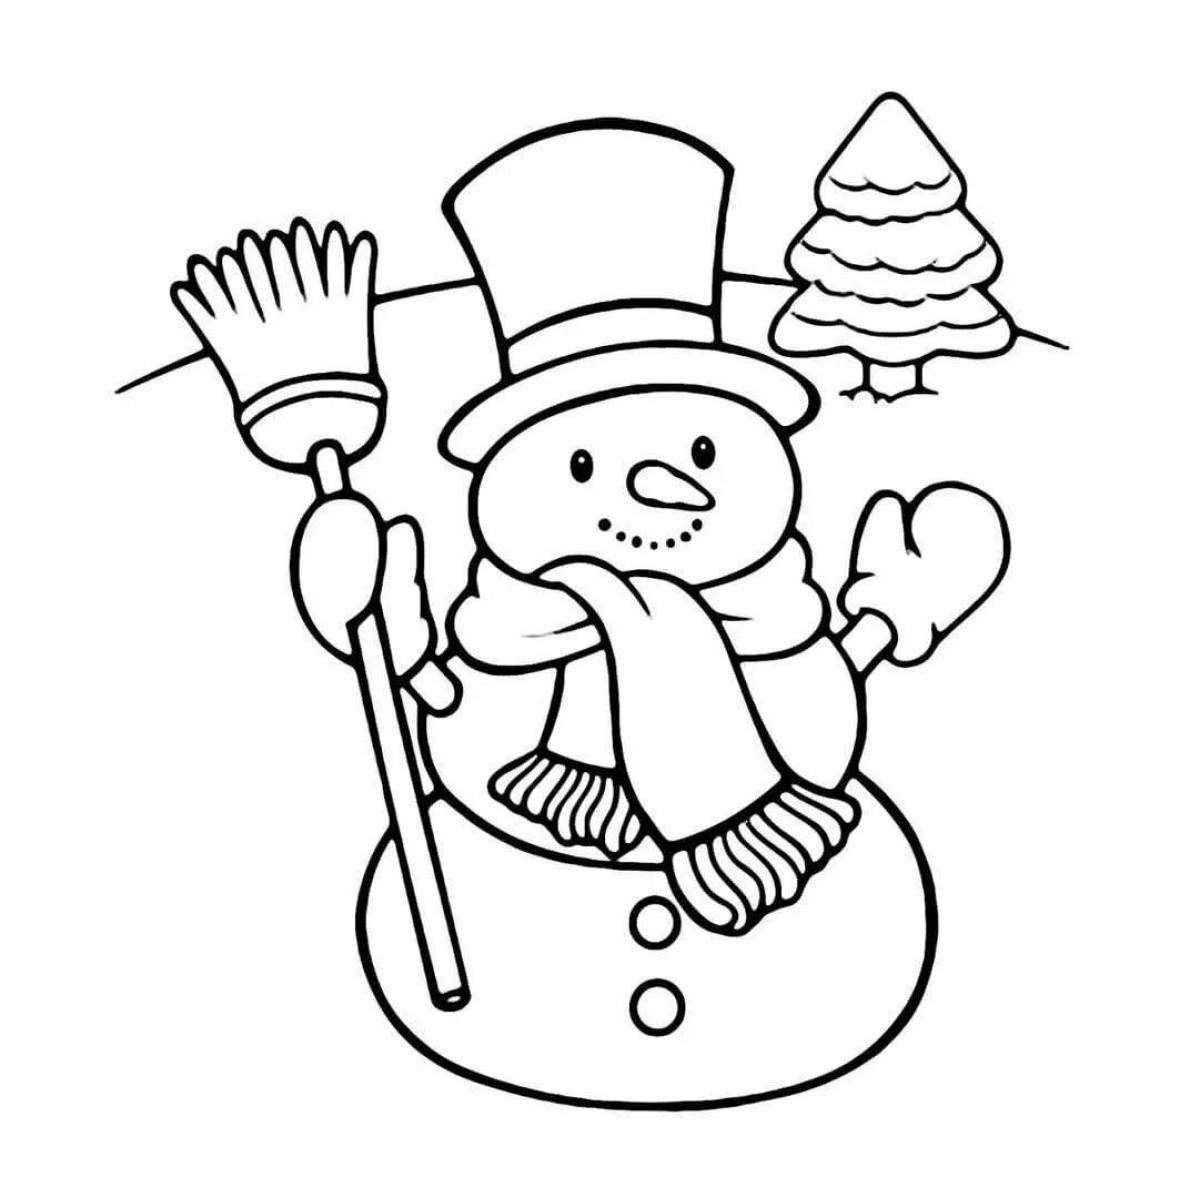 Glowing birthday snowman coloring page